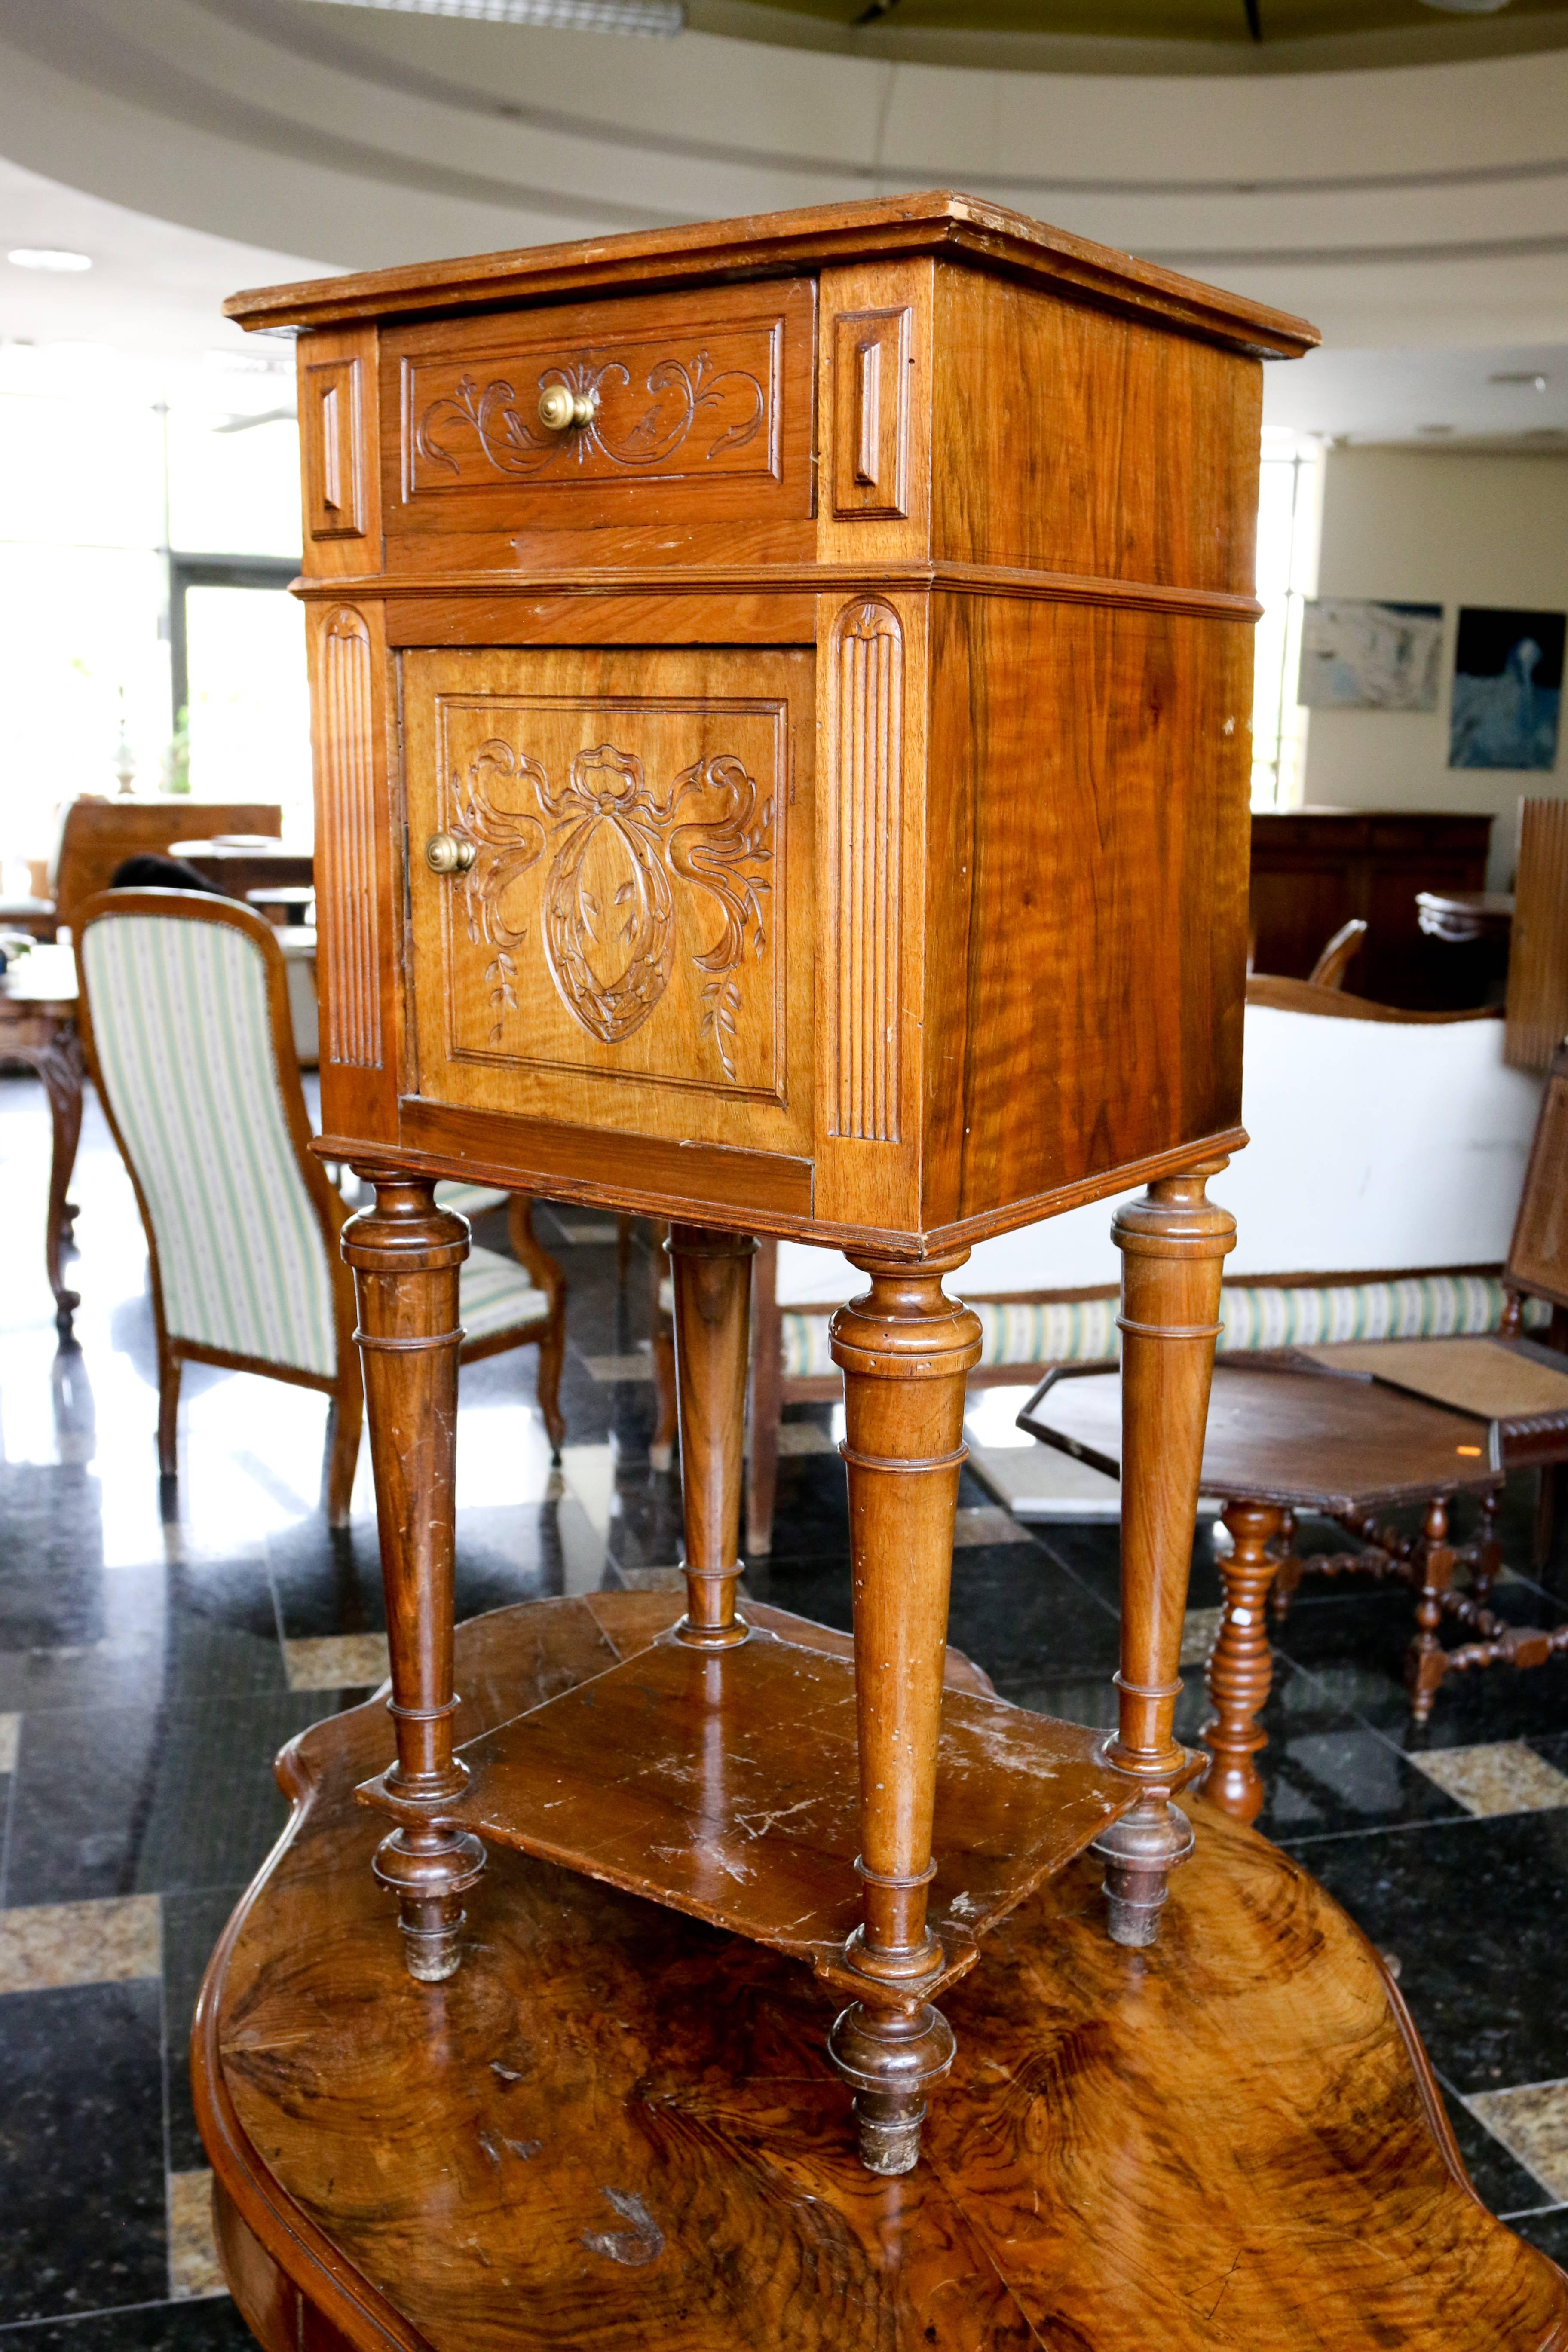 French 19th century walnut bedside cabinet. Often known as chevet or night table in France. The cabinet dates from circa 1880, it is made from walnut and it stands on tall turned legs. The drawer and the door have carvings in Louis XVI style